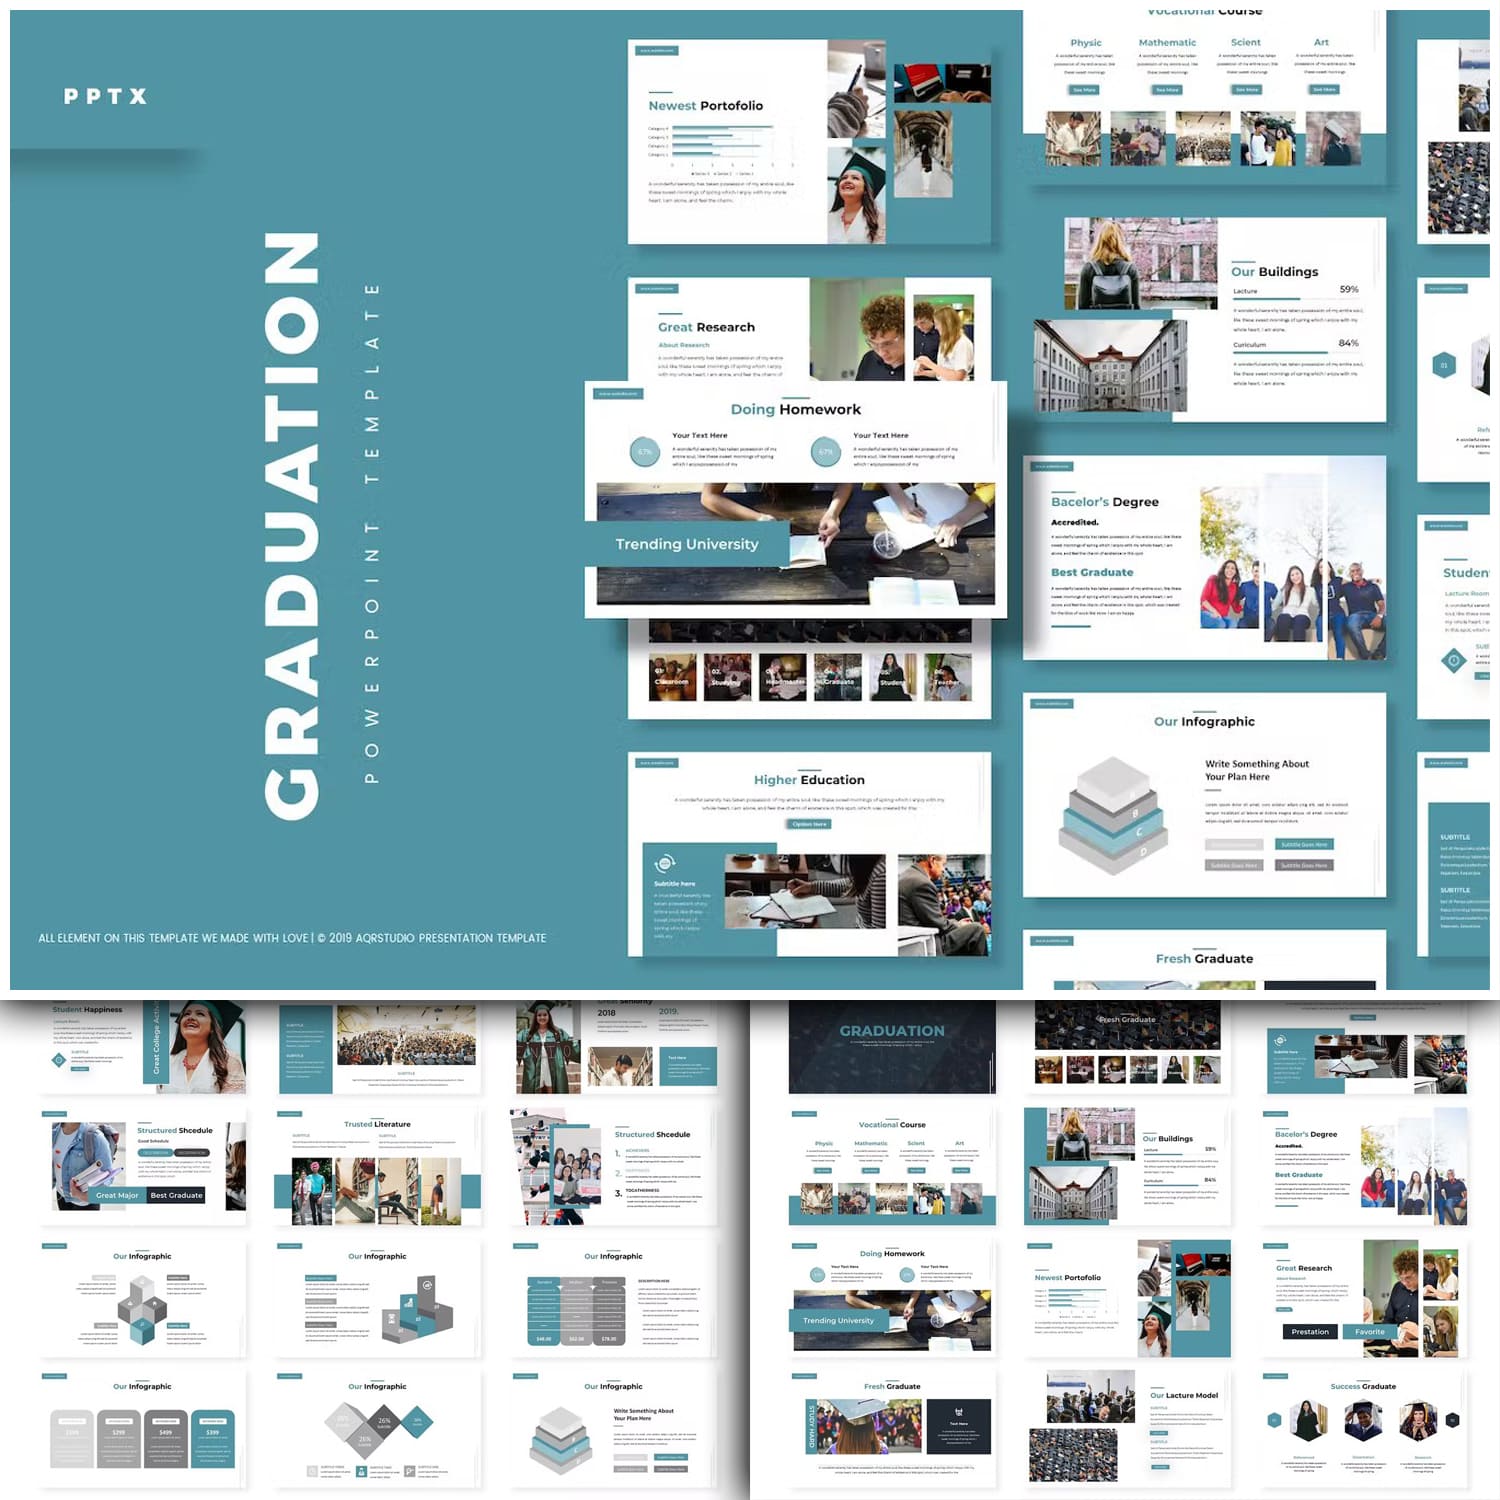 Pack of images of gorgeous graduation presentation template slides.